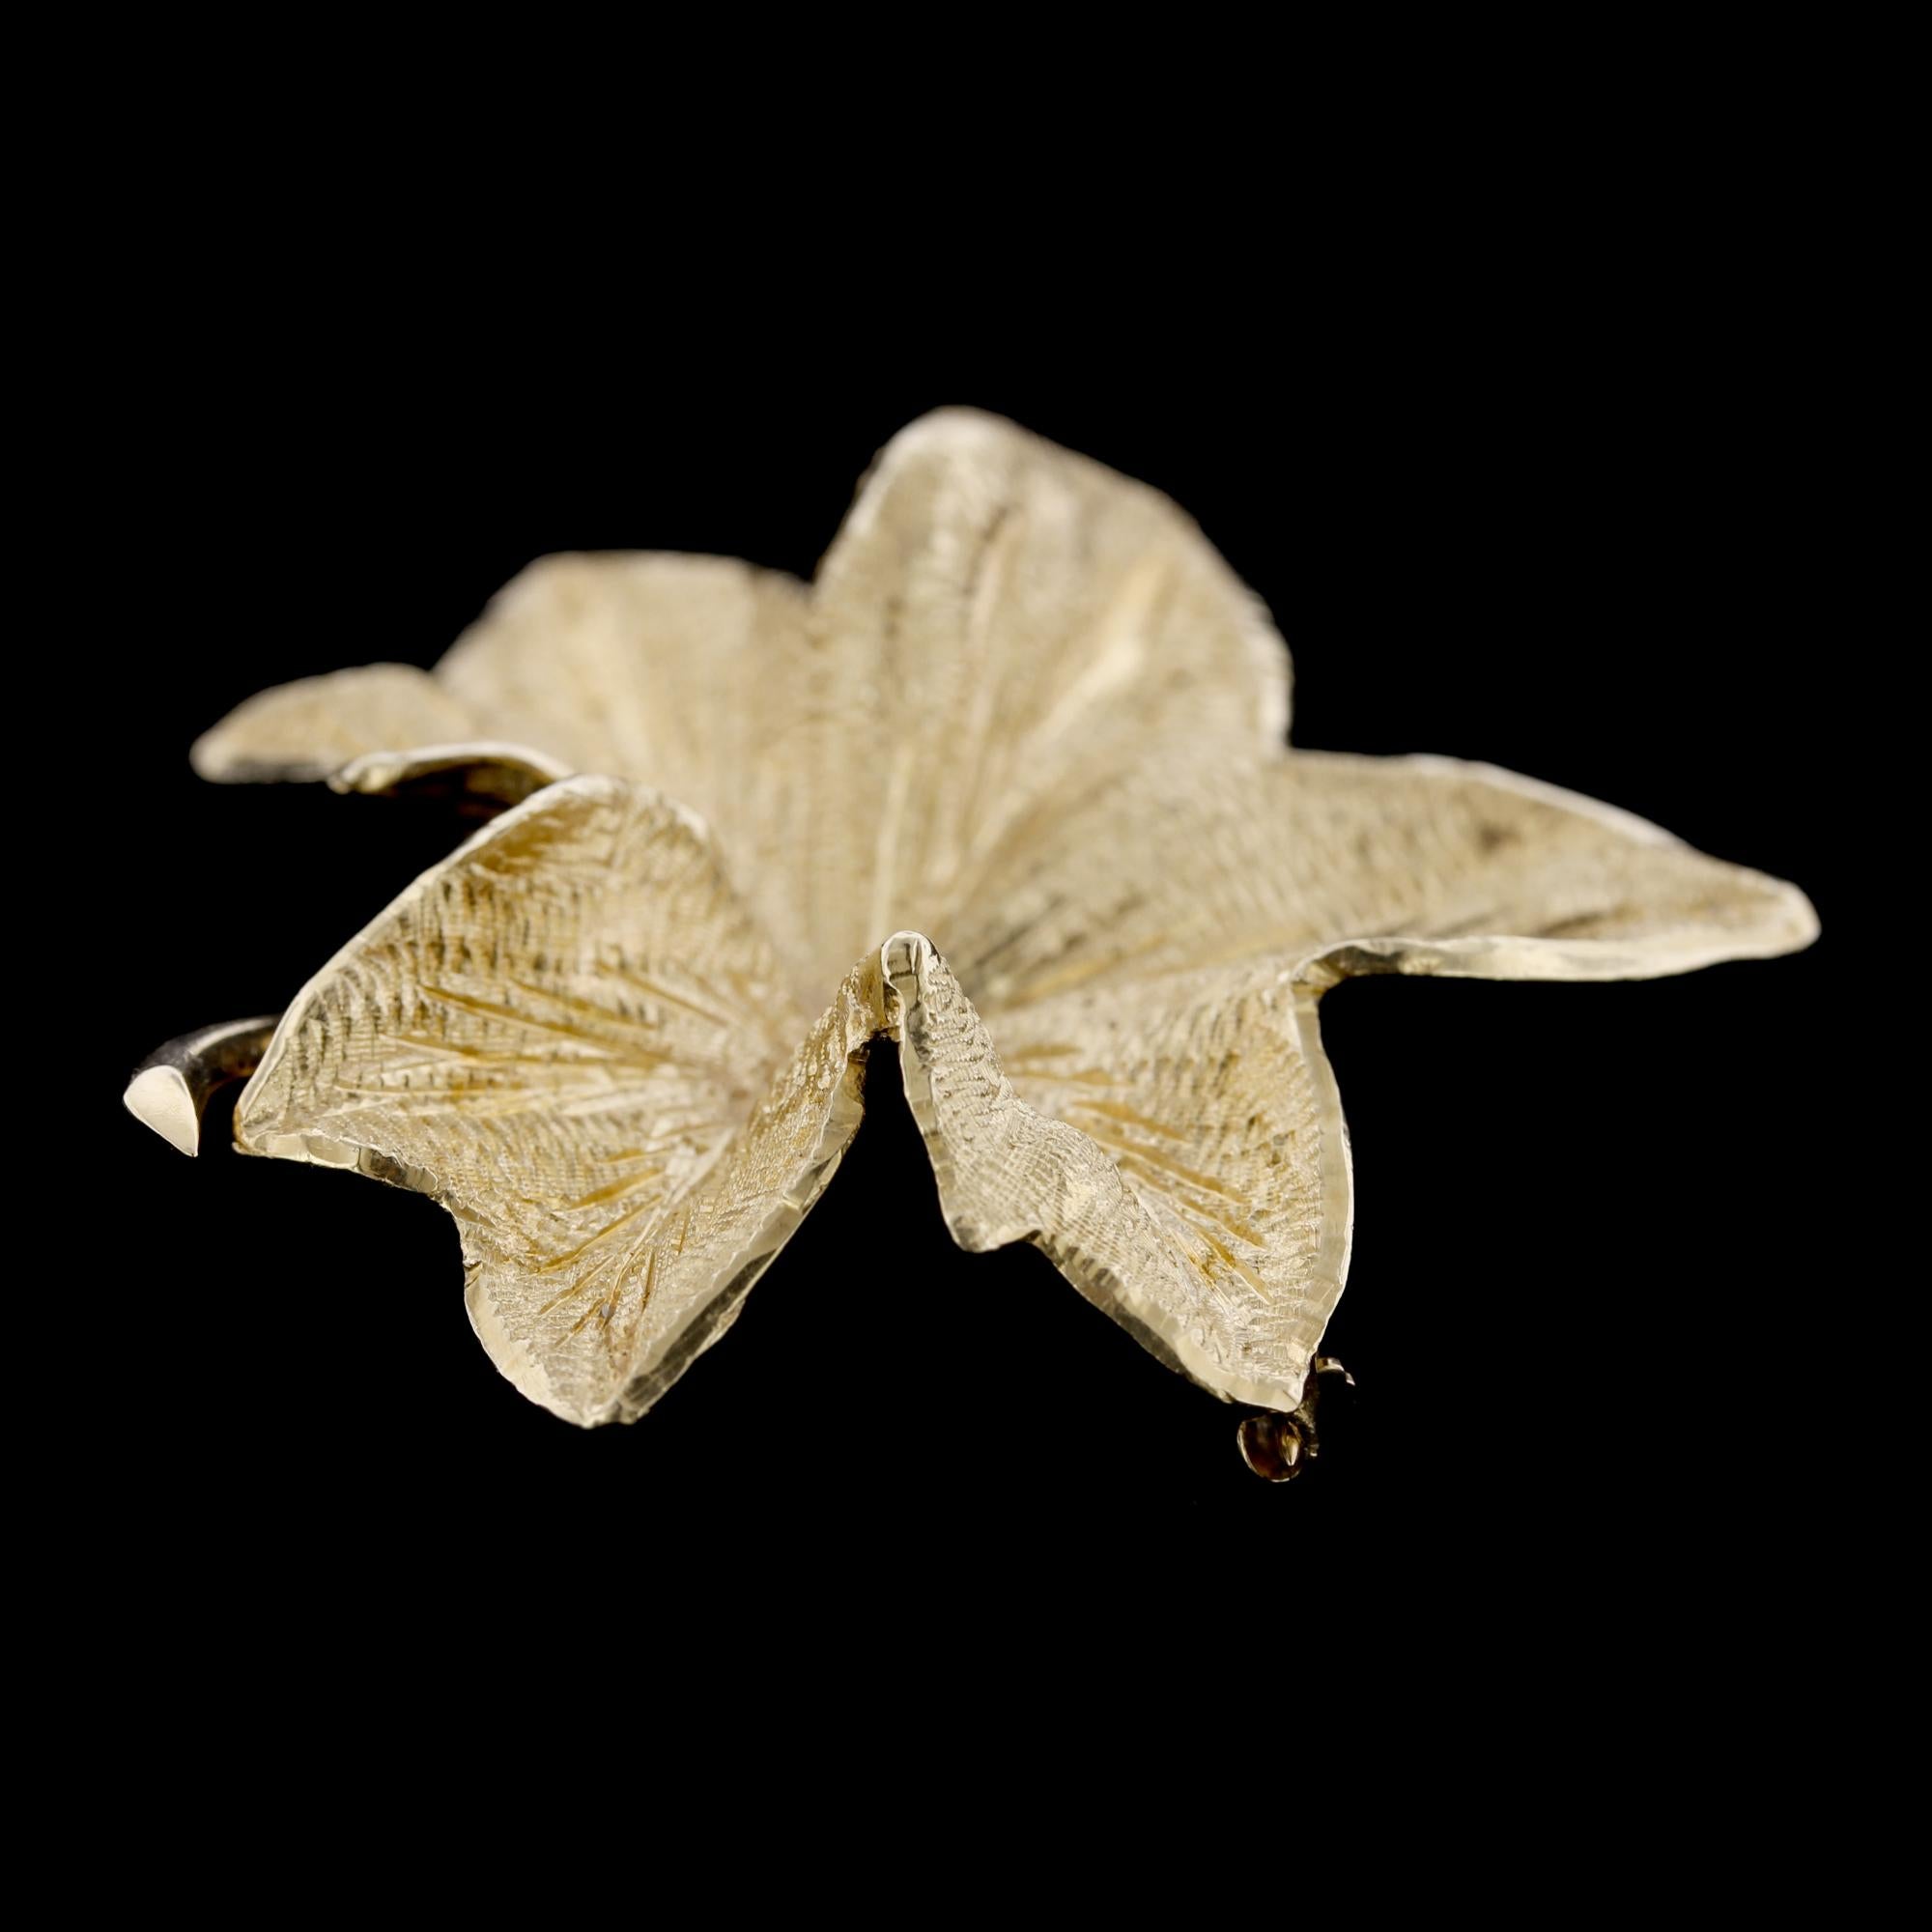 Tiffany & Co. 14K Yellow Gold Leaf Brooch. The pin is designed as a textured leaf, length 1 3/4